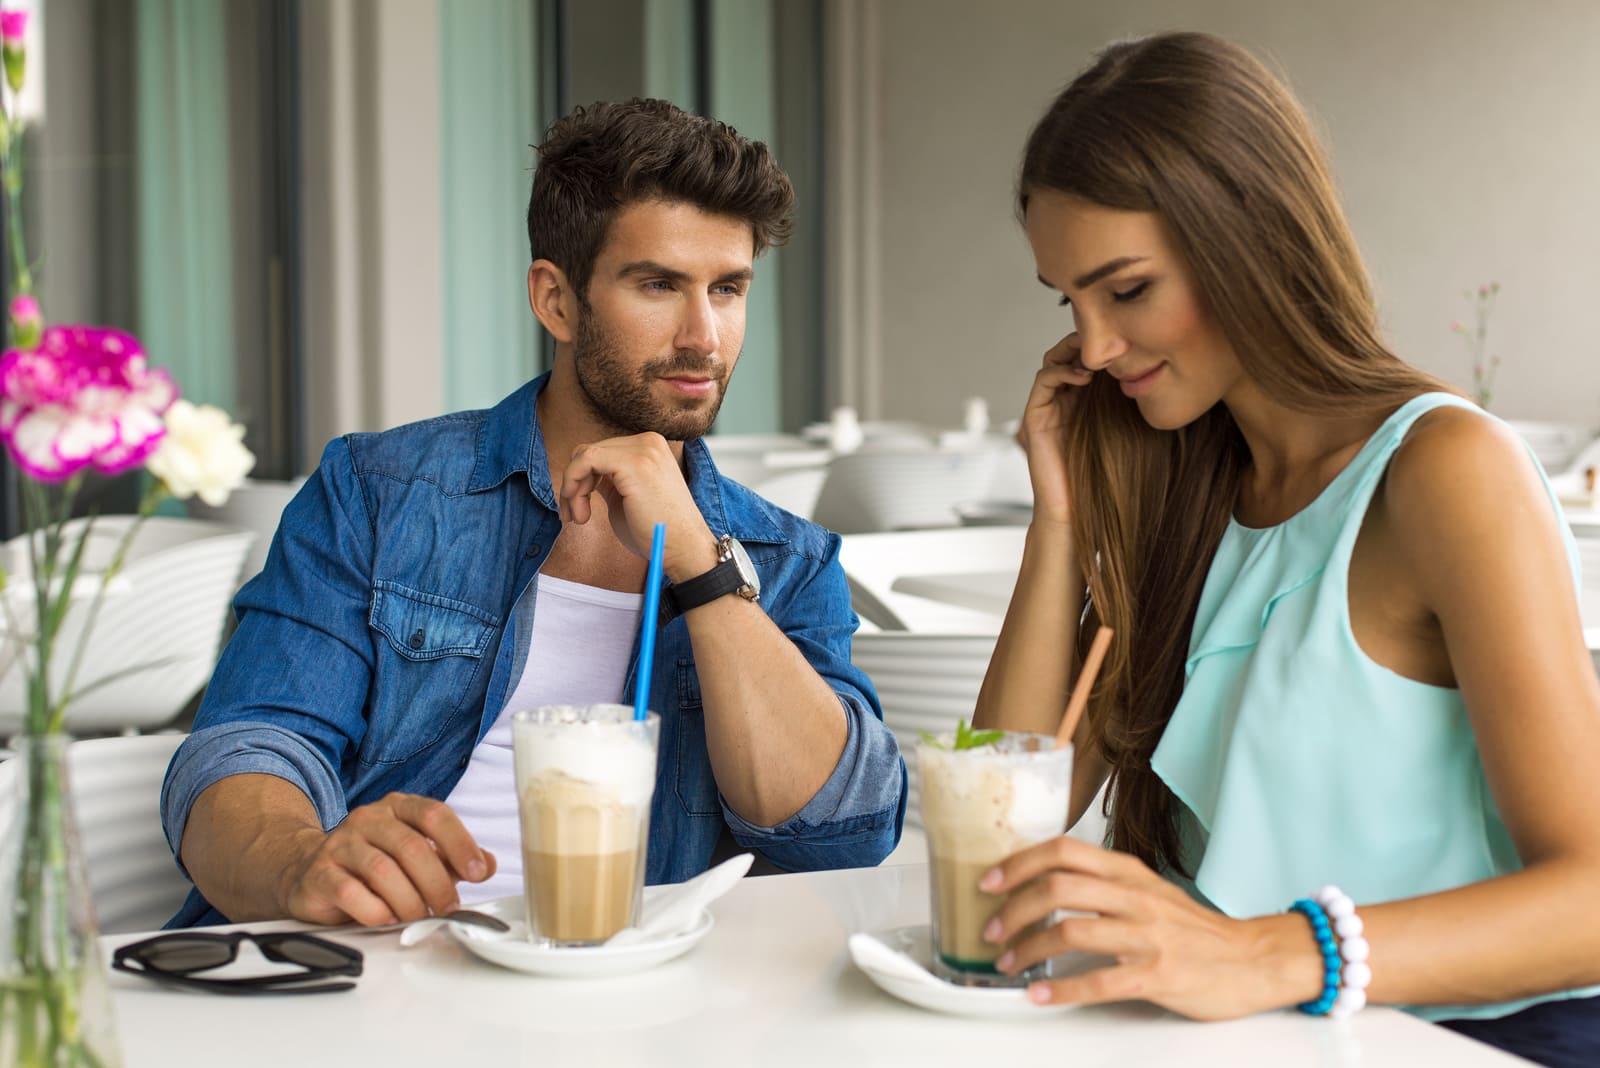 man flirting with young woman in a cafe